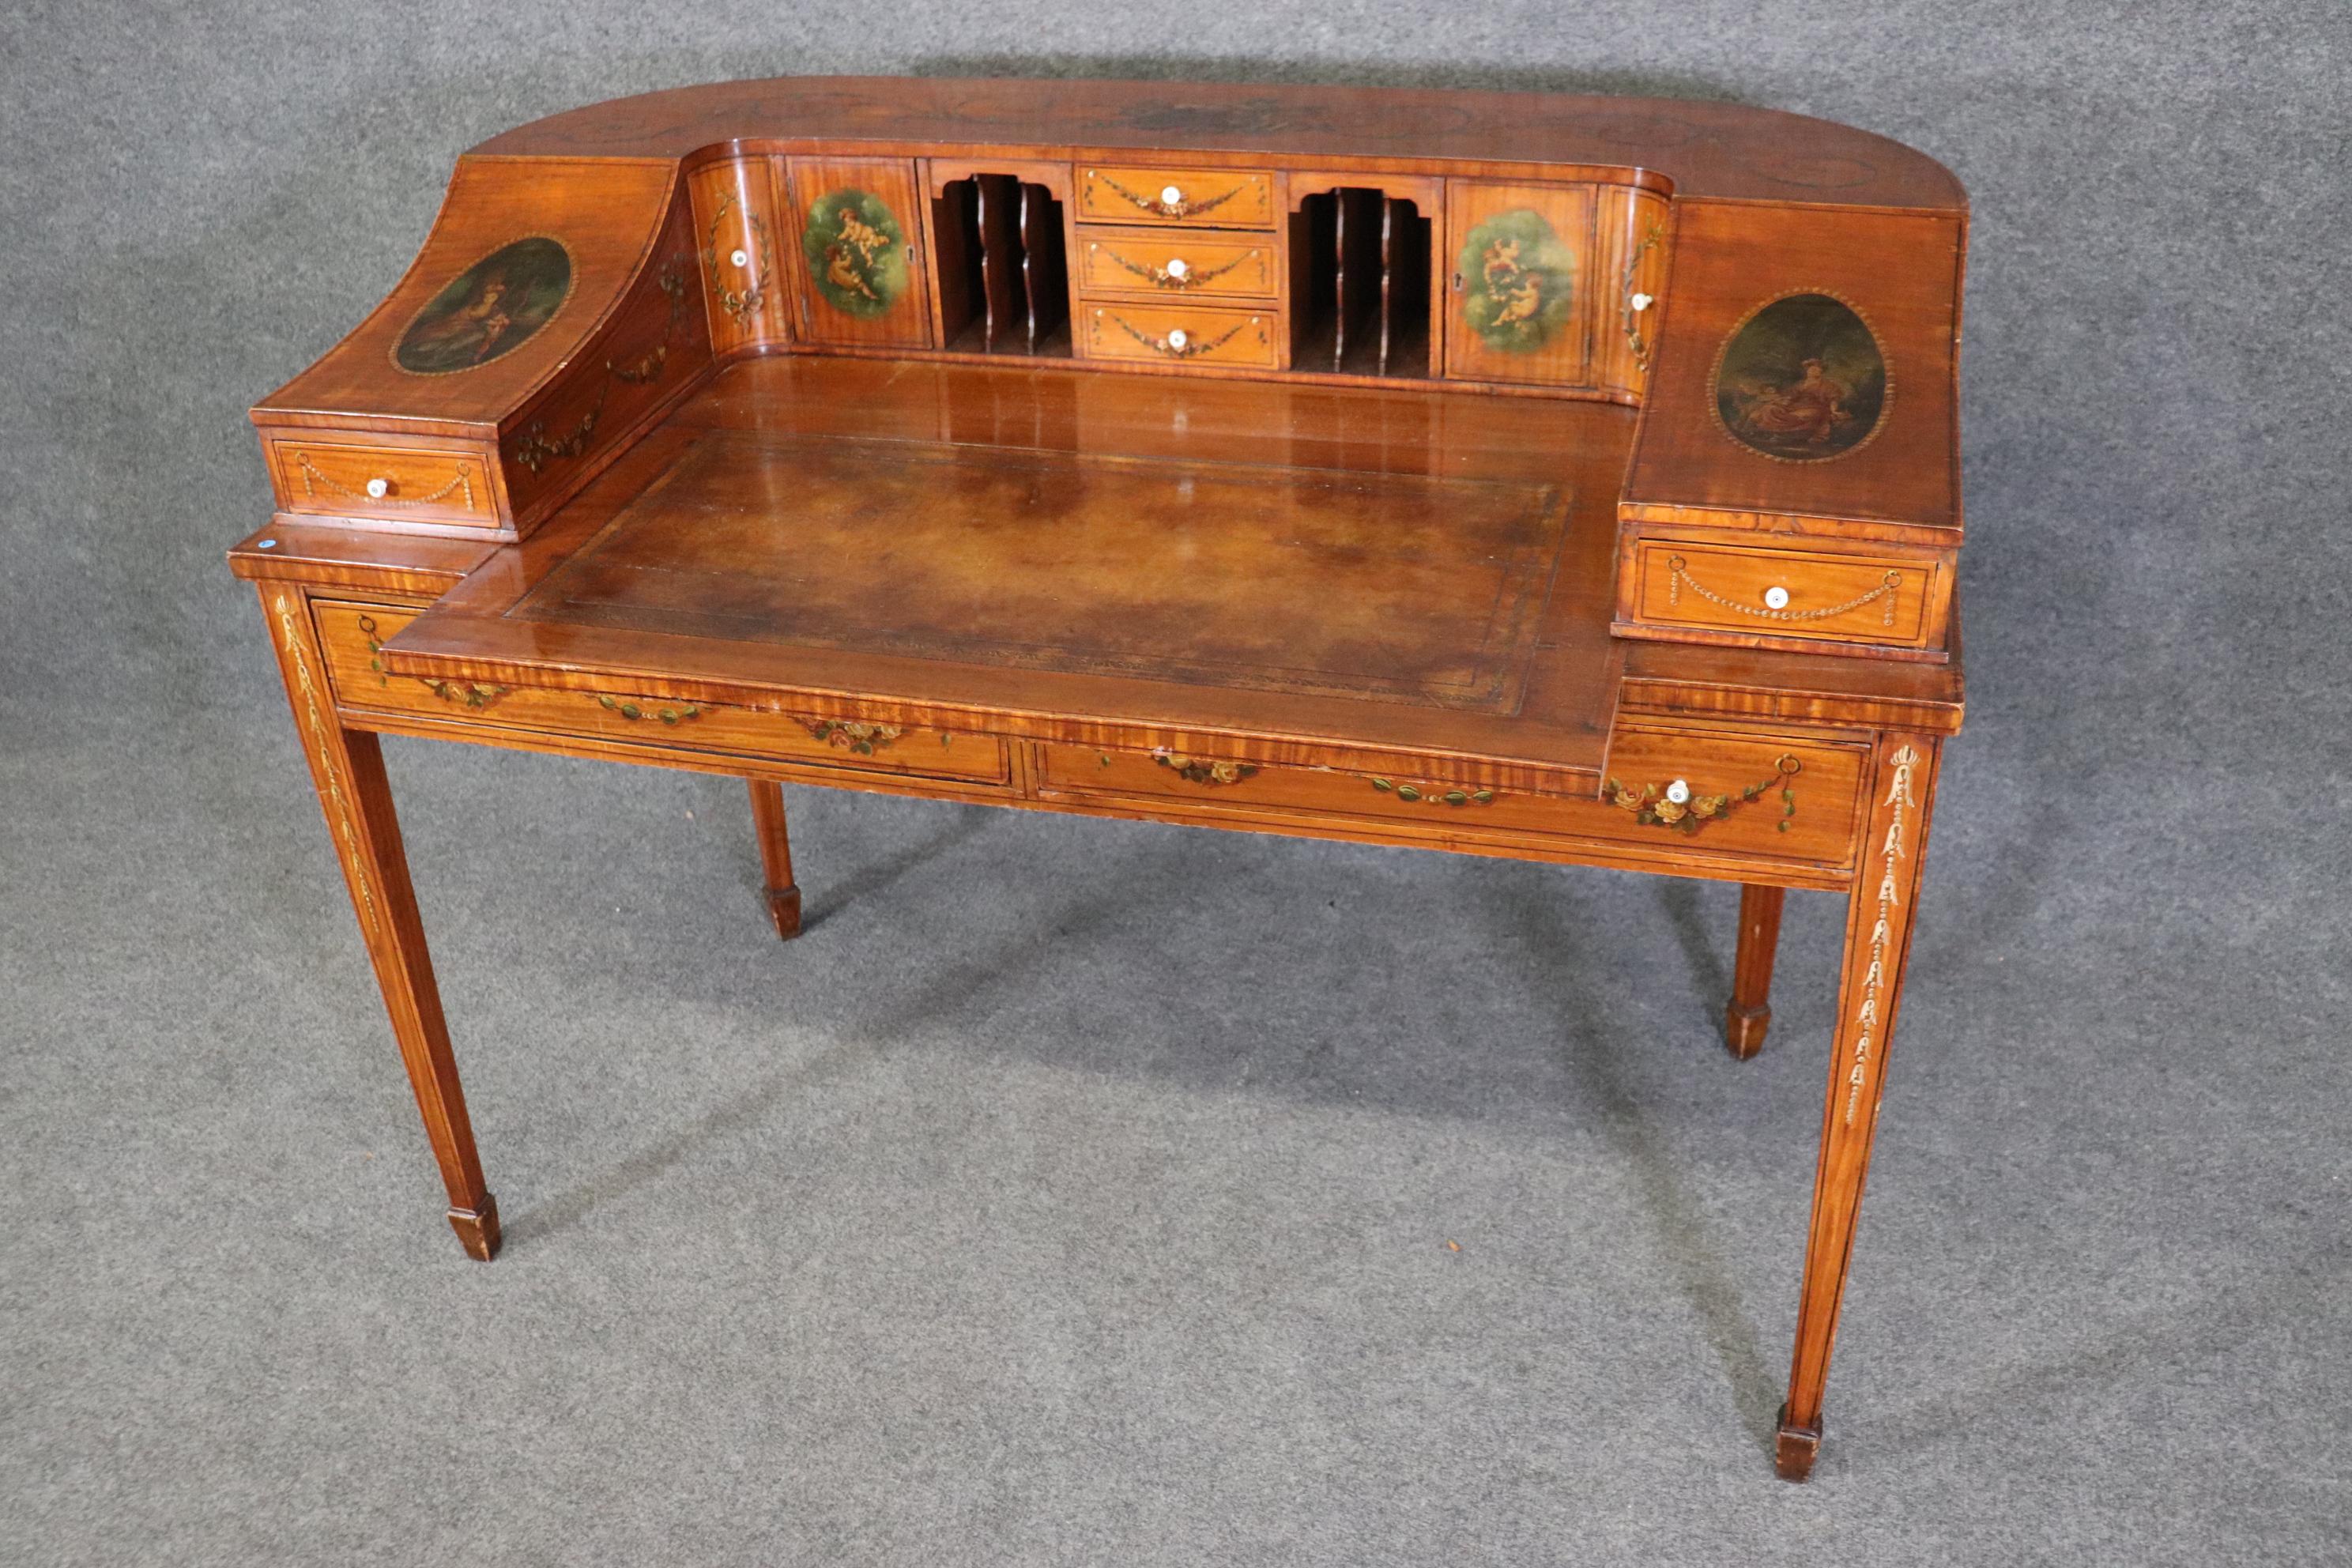 Fine Quality English Satinwood Carlton House Desk with Cherubs and Musical Theme 14